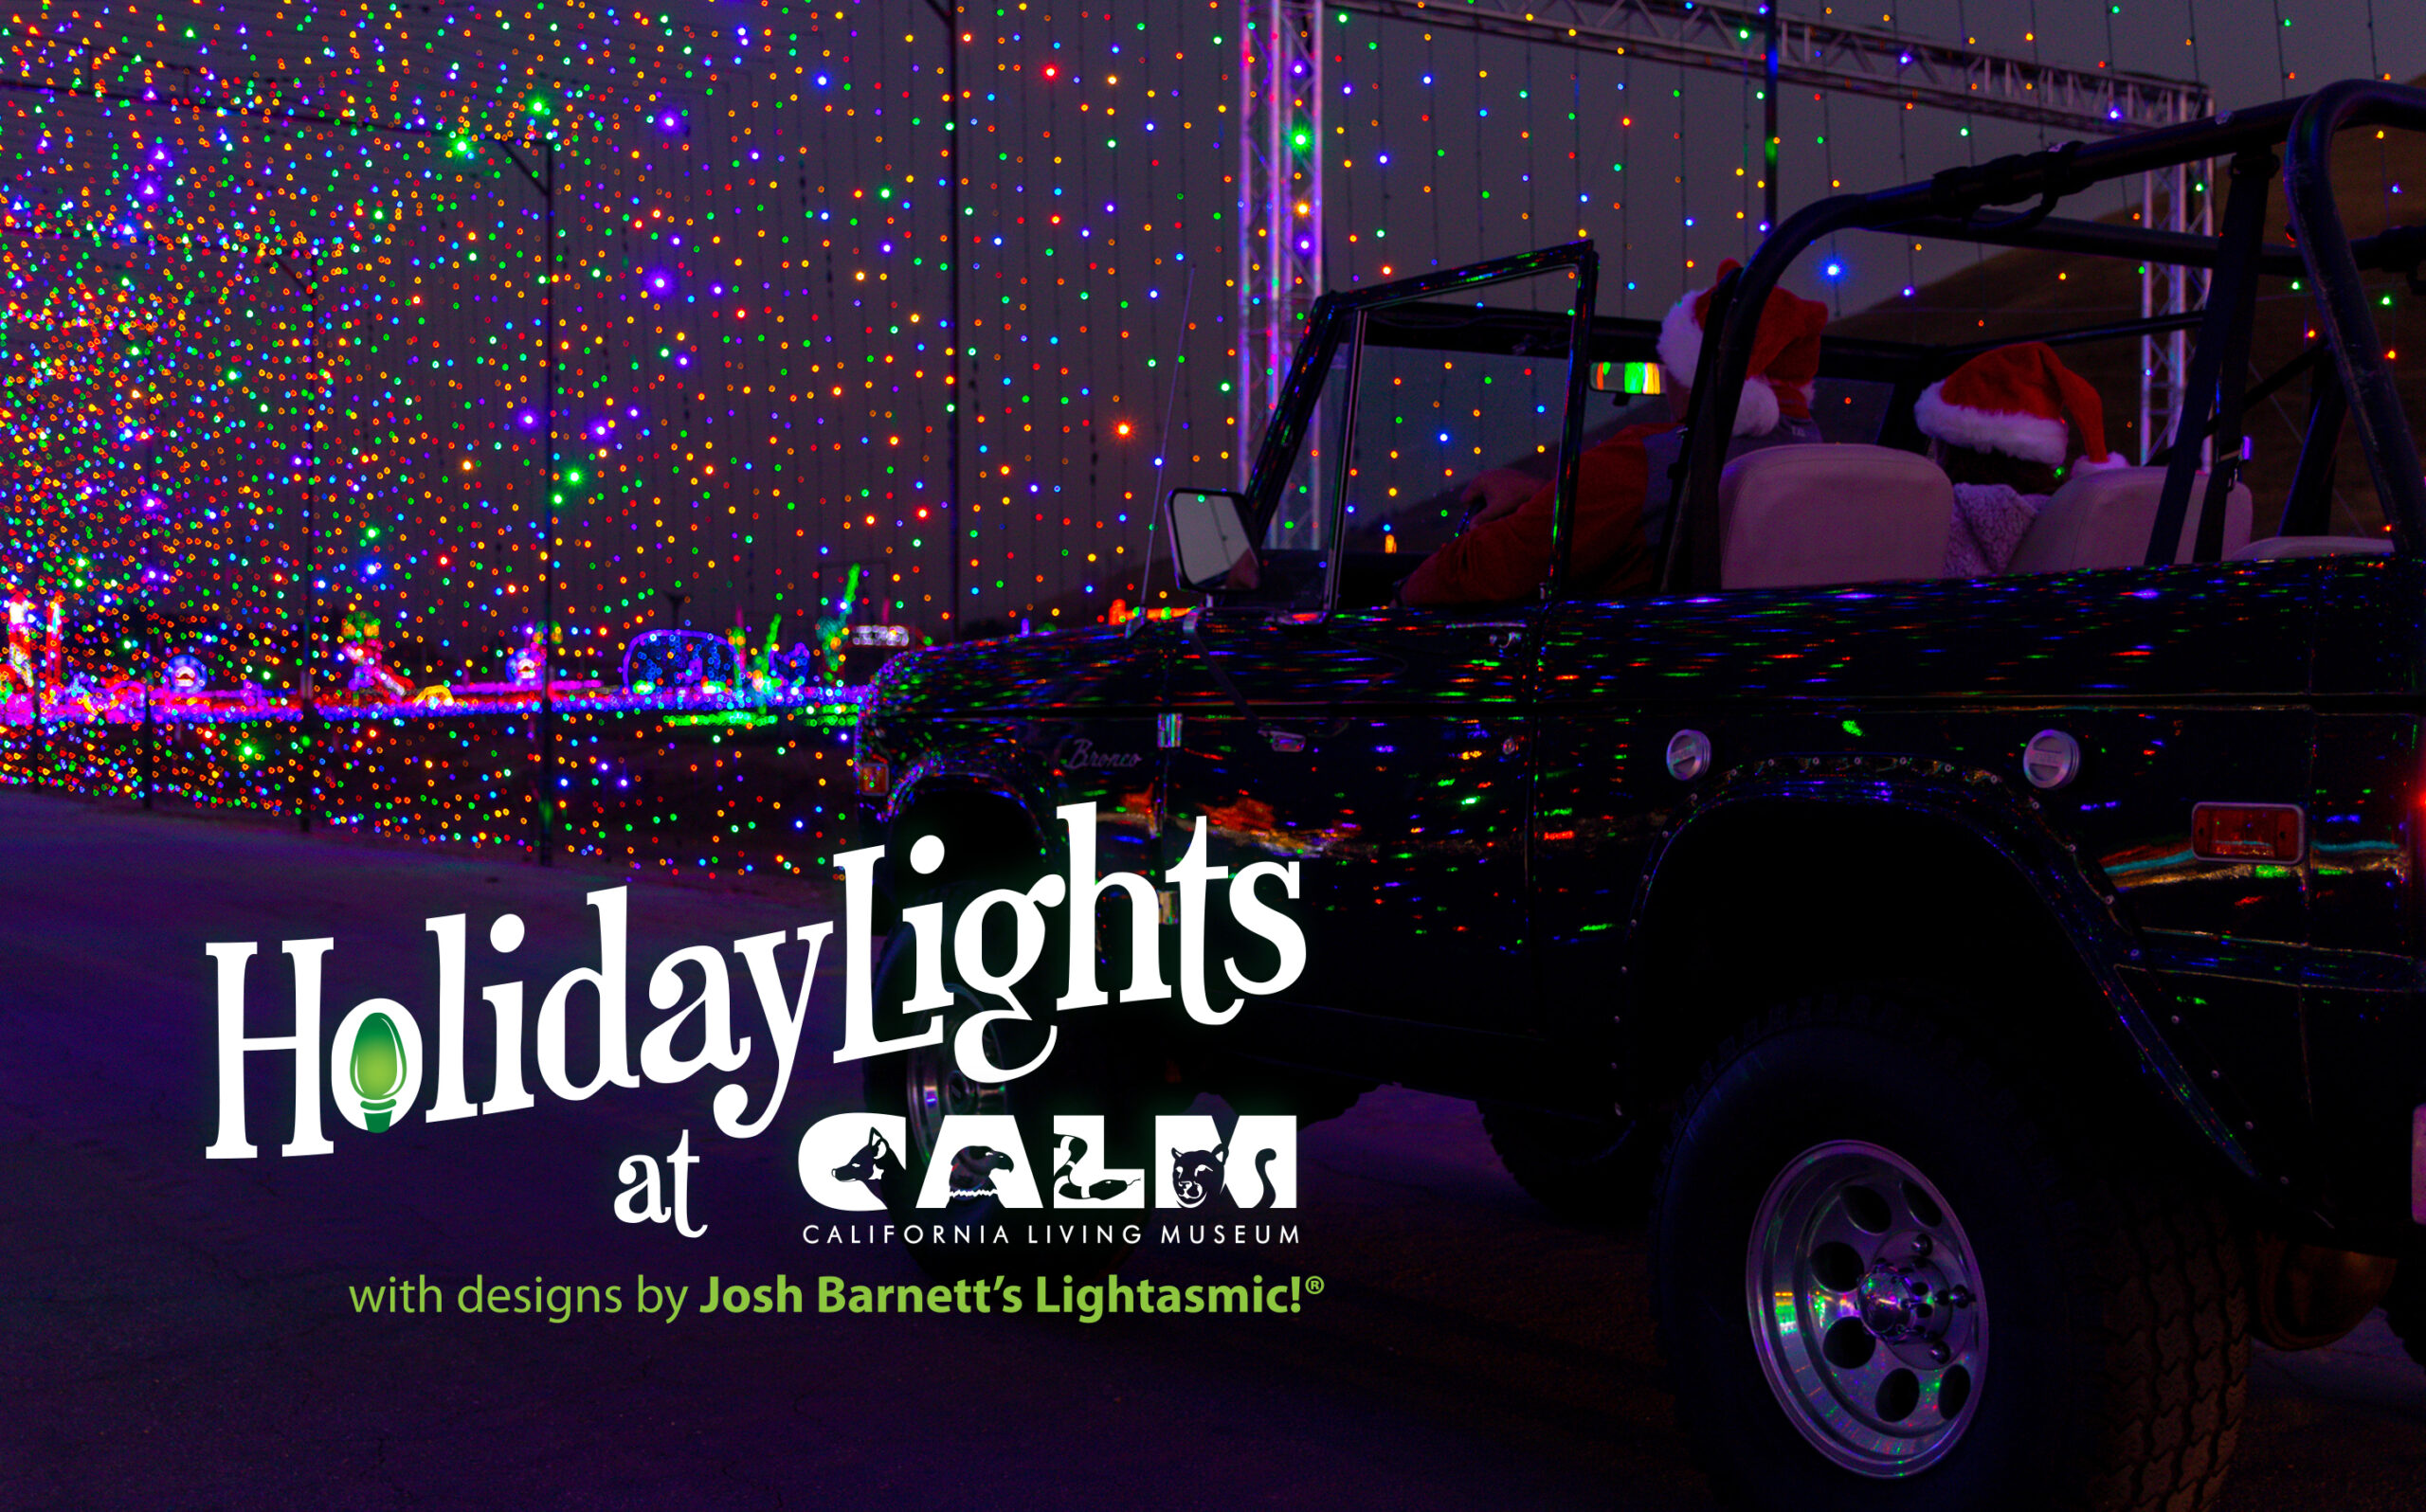 CALM’s HolidayLights Returns for 20th Year